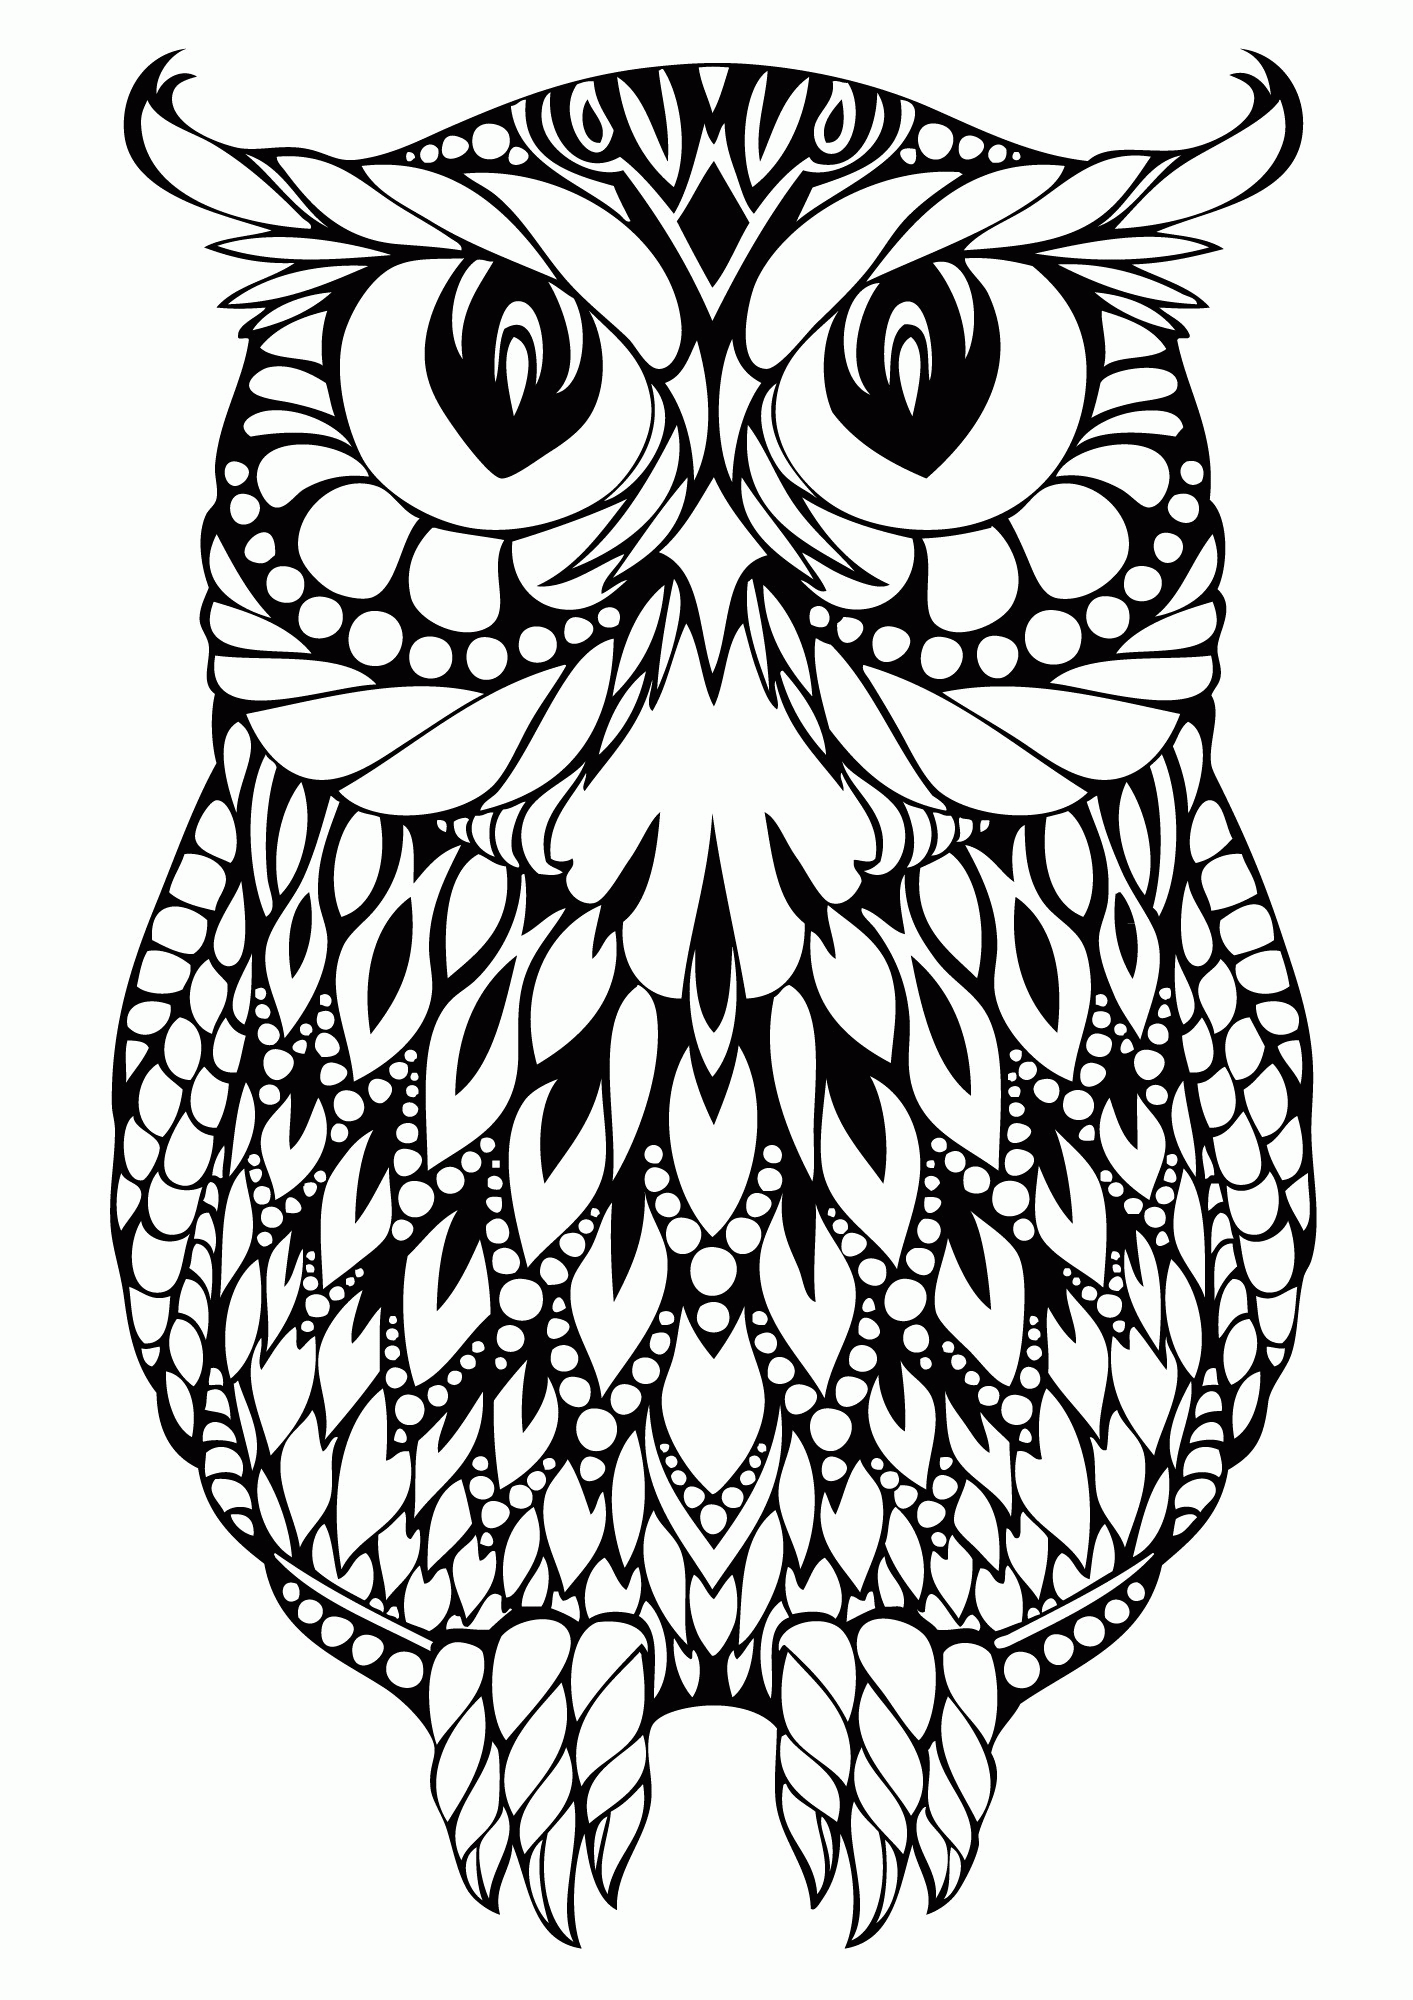 coloring-pages-for-adults-patterns-animals-2.jpg